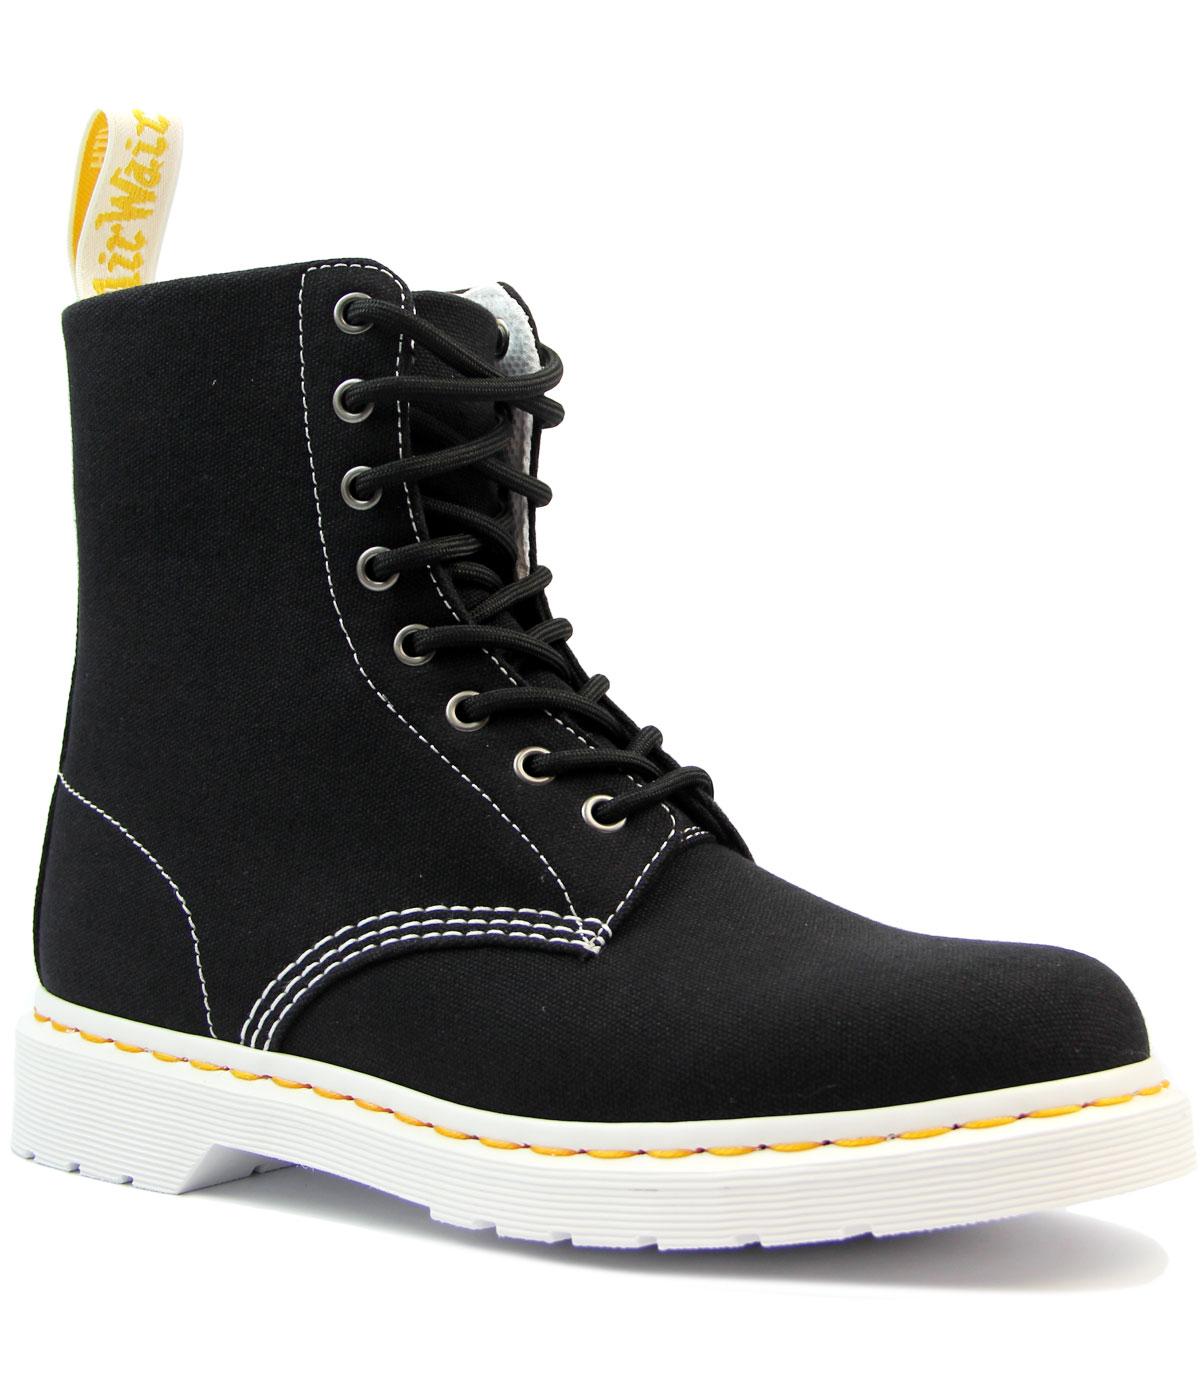 Page DR MARTENS Retro 8 Eye Canvas Sneaker Boots